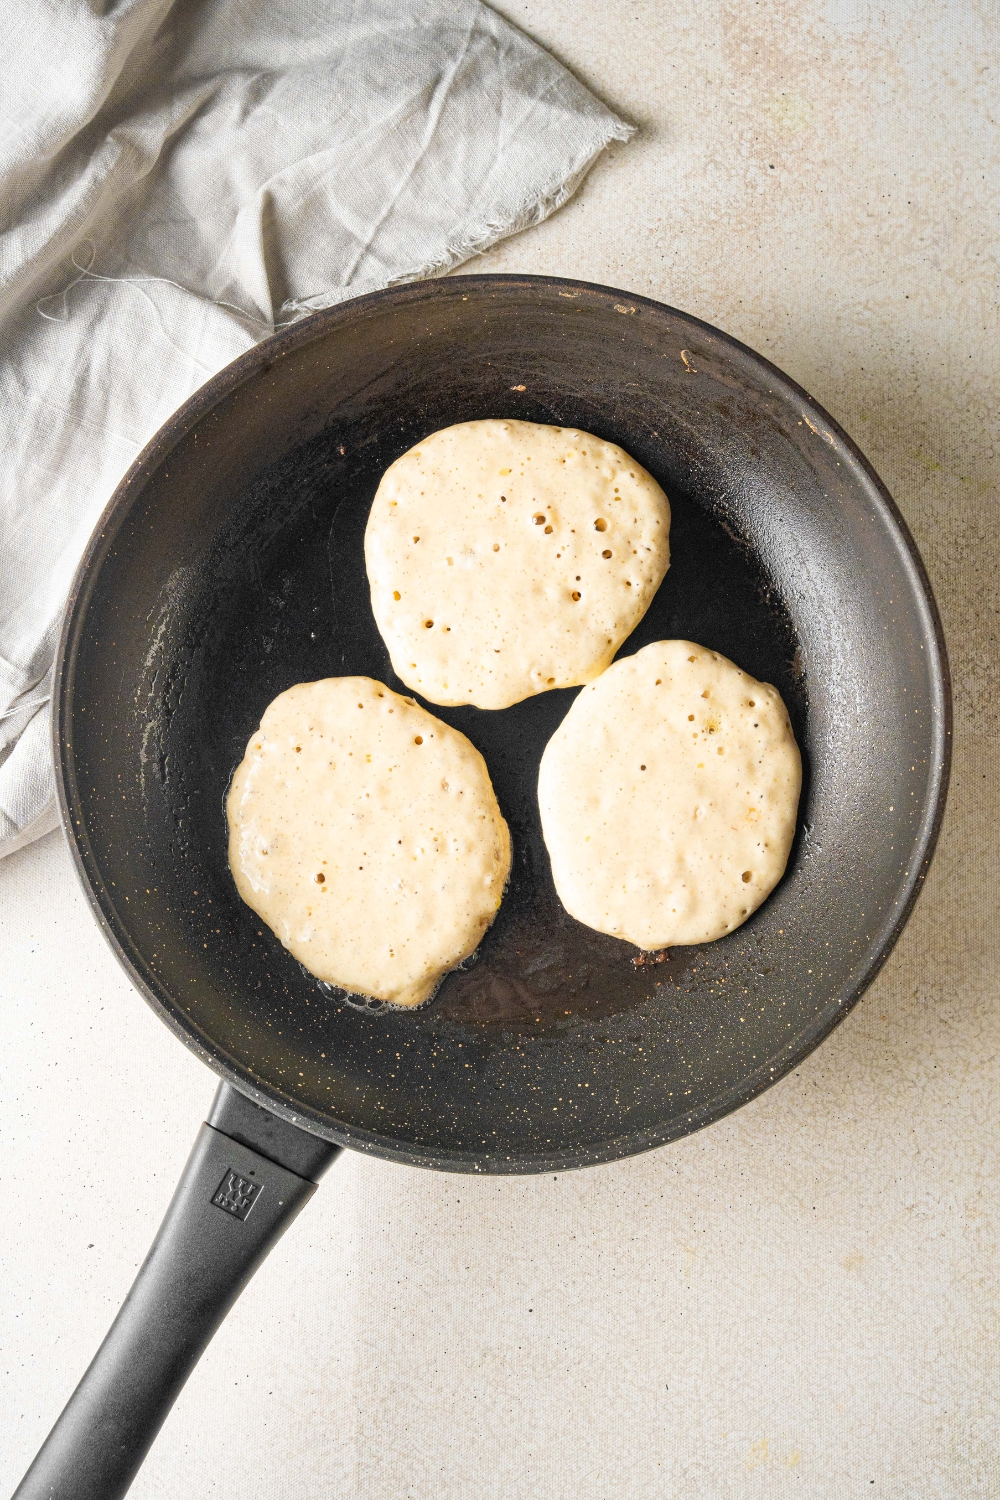 A frying pan with the pancakes cooking.